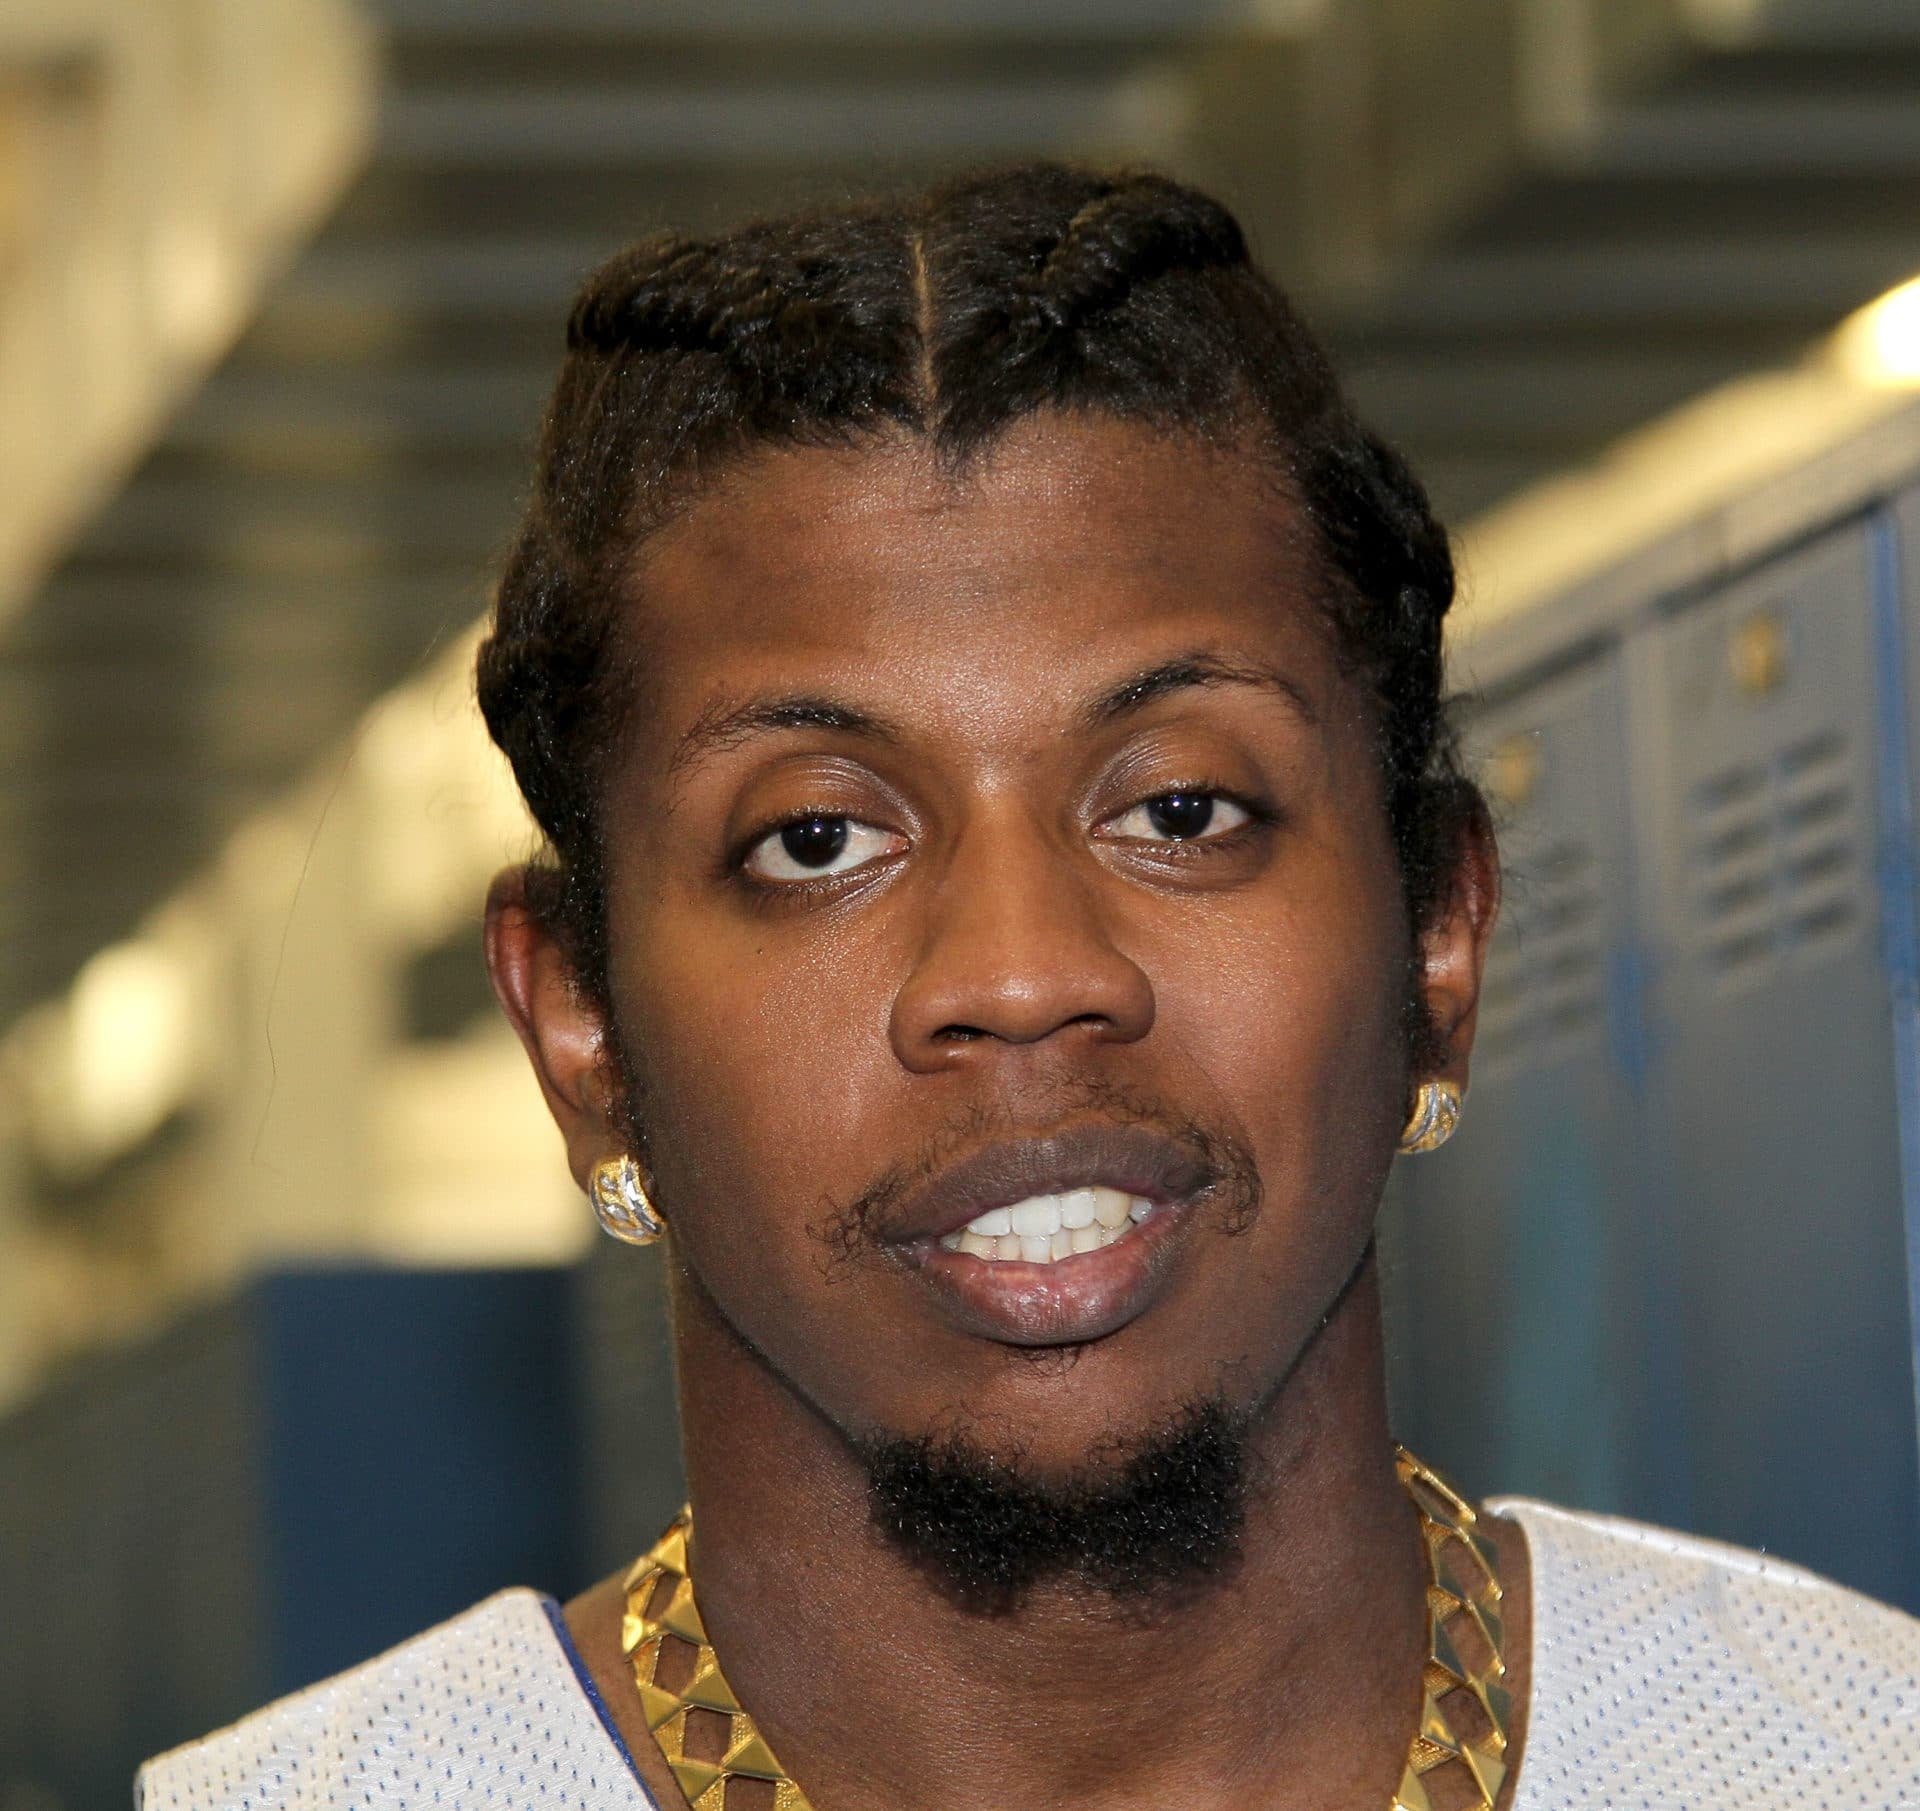 EXCLUSIVE Video: Trinidad James Gets His Nails Done & Dishes On His 'Fearless' Fashion Sense